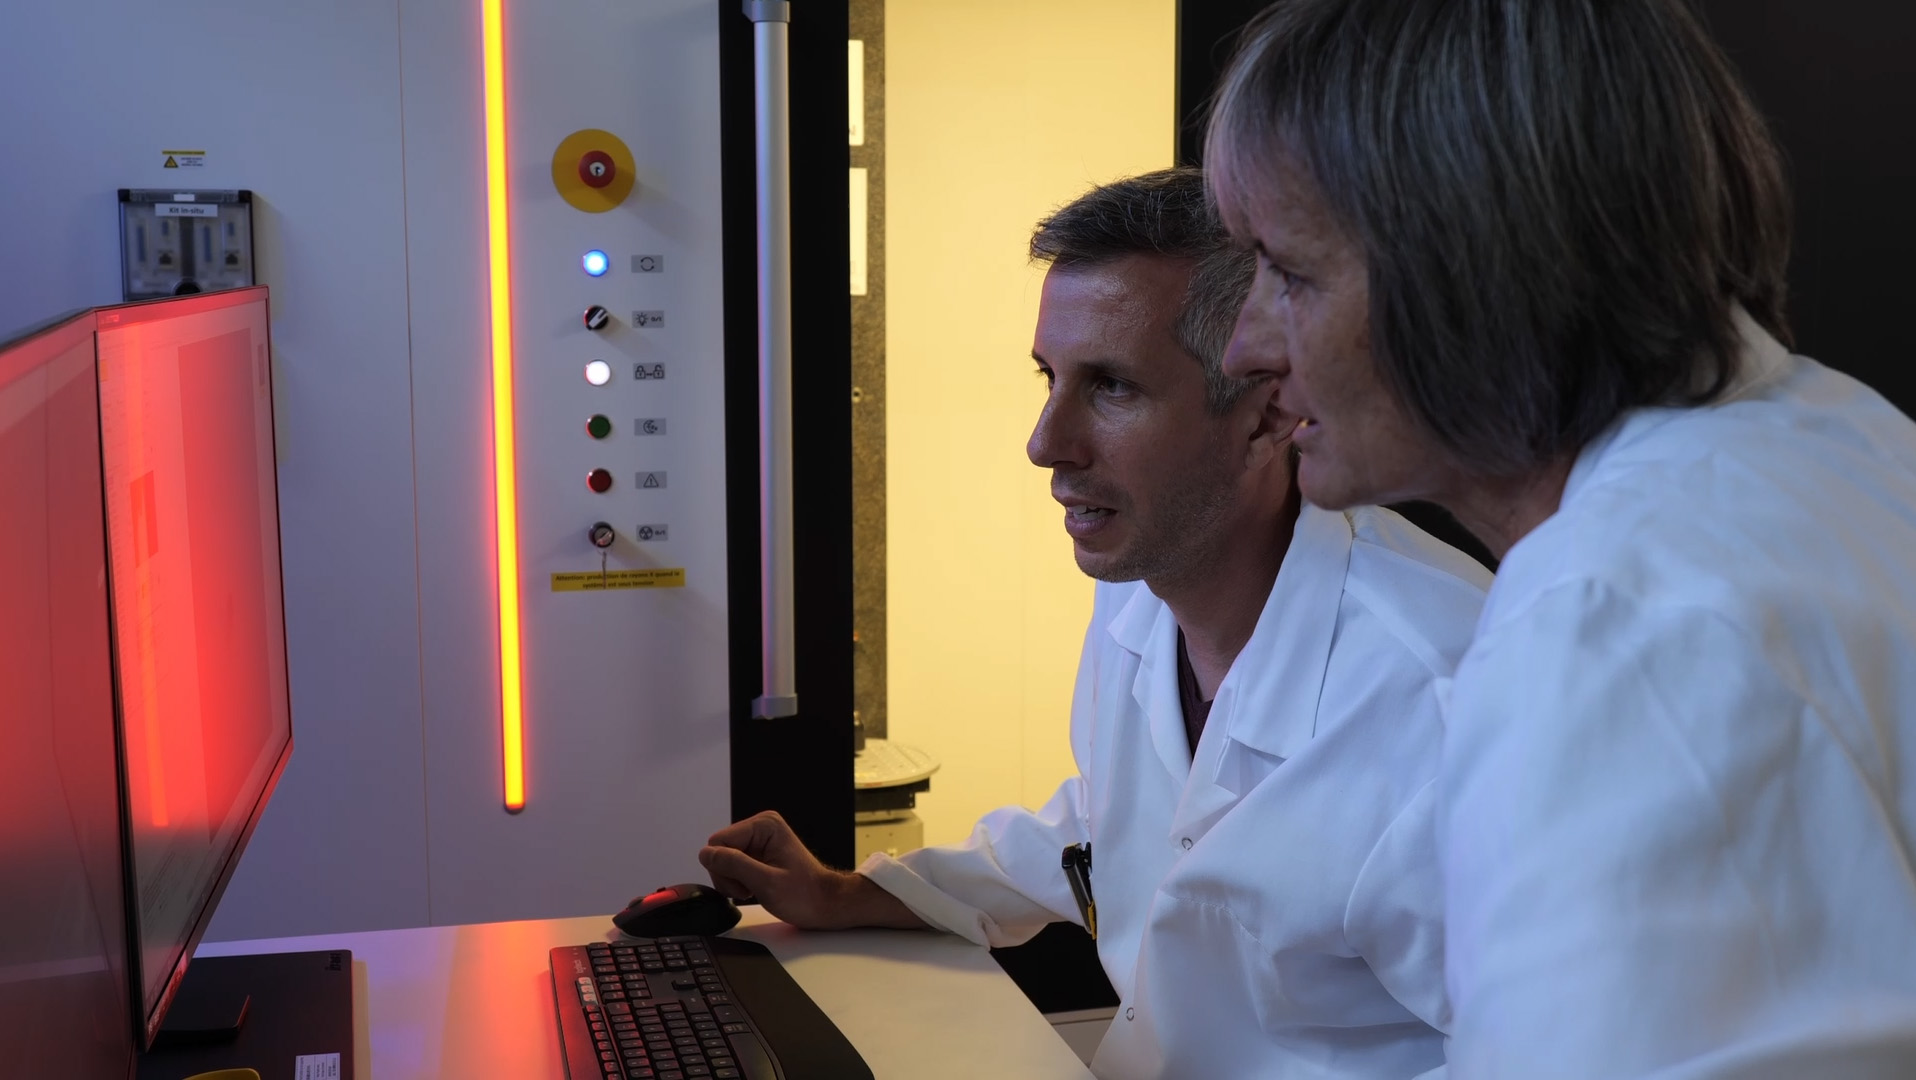 Stéphane Faucher and Pascale Sénéchal, research engineers at the DMEX Center for X-ray Imaging. Image Credit: TESCAN